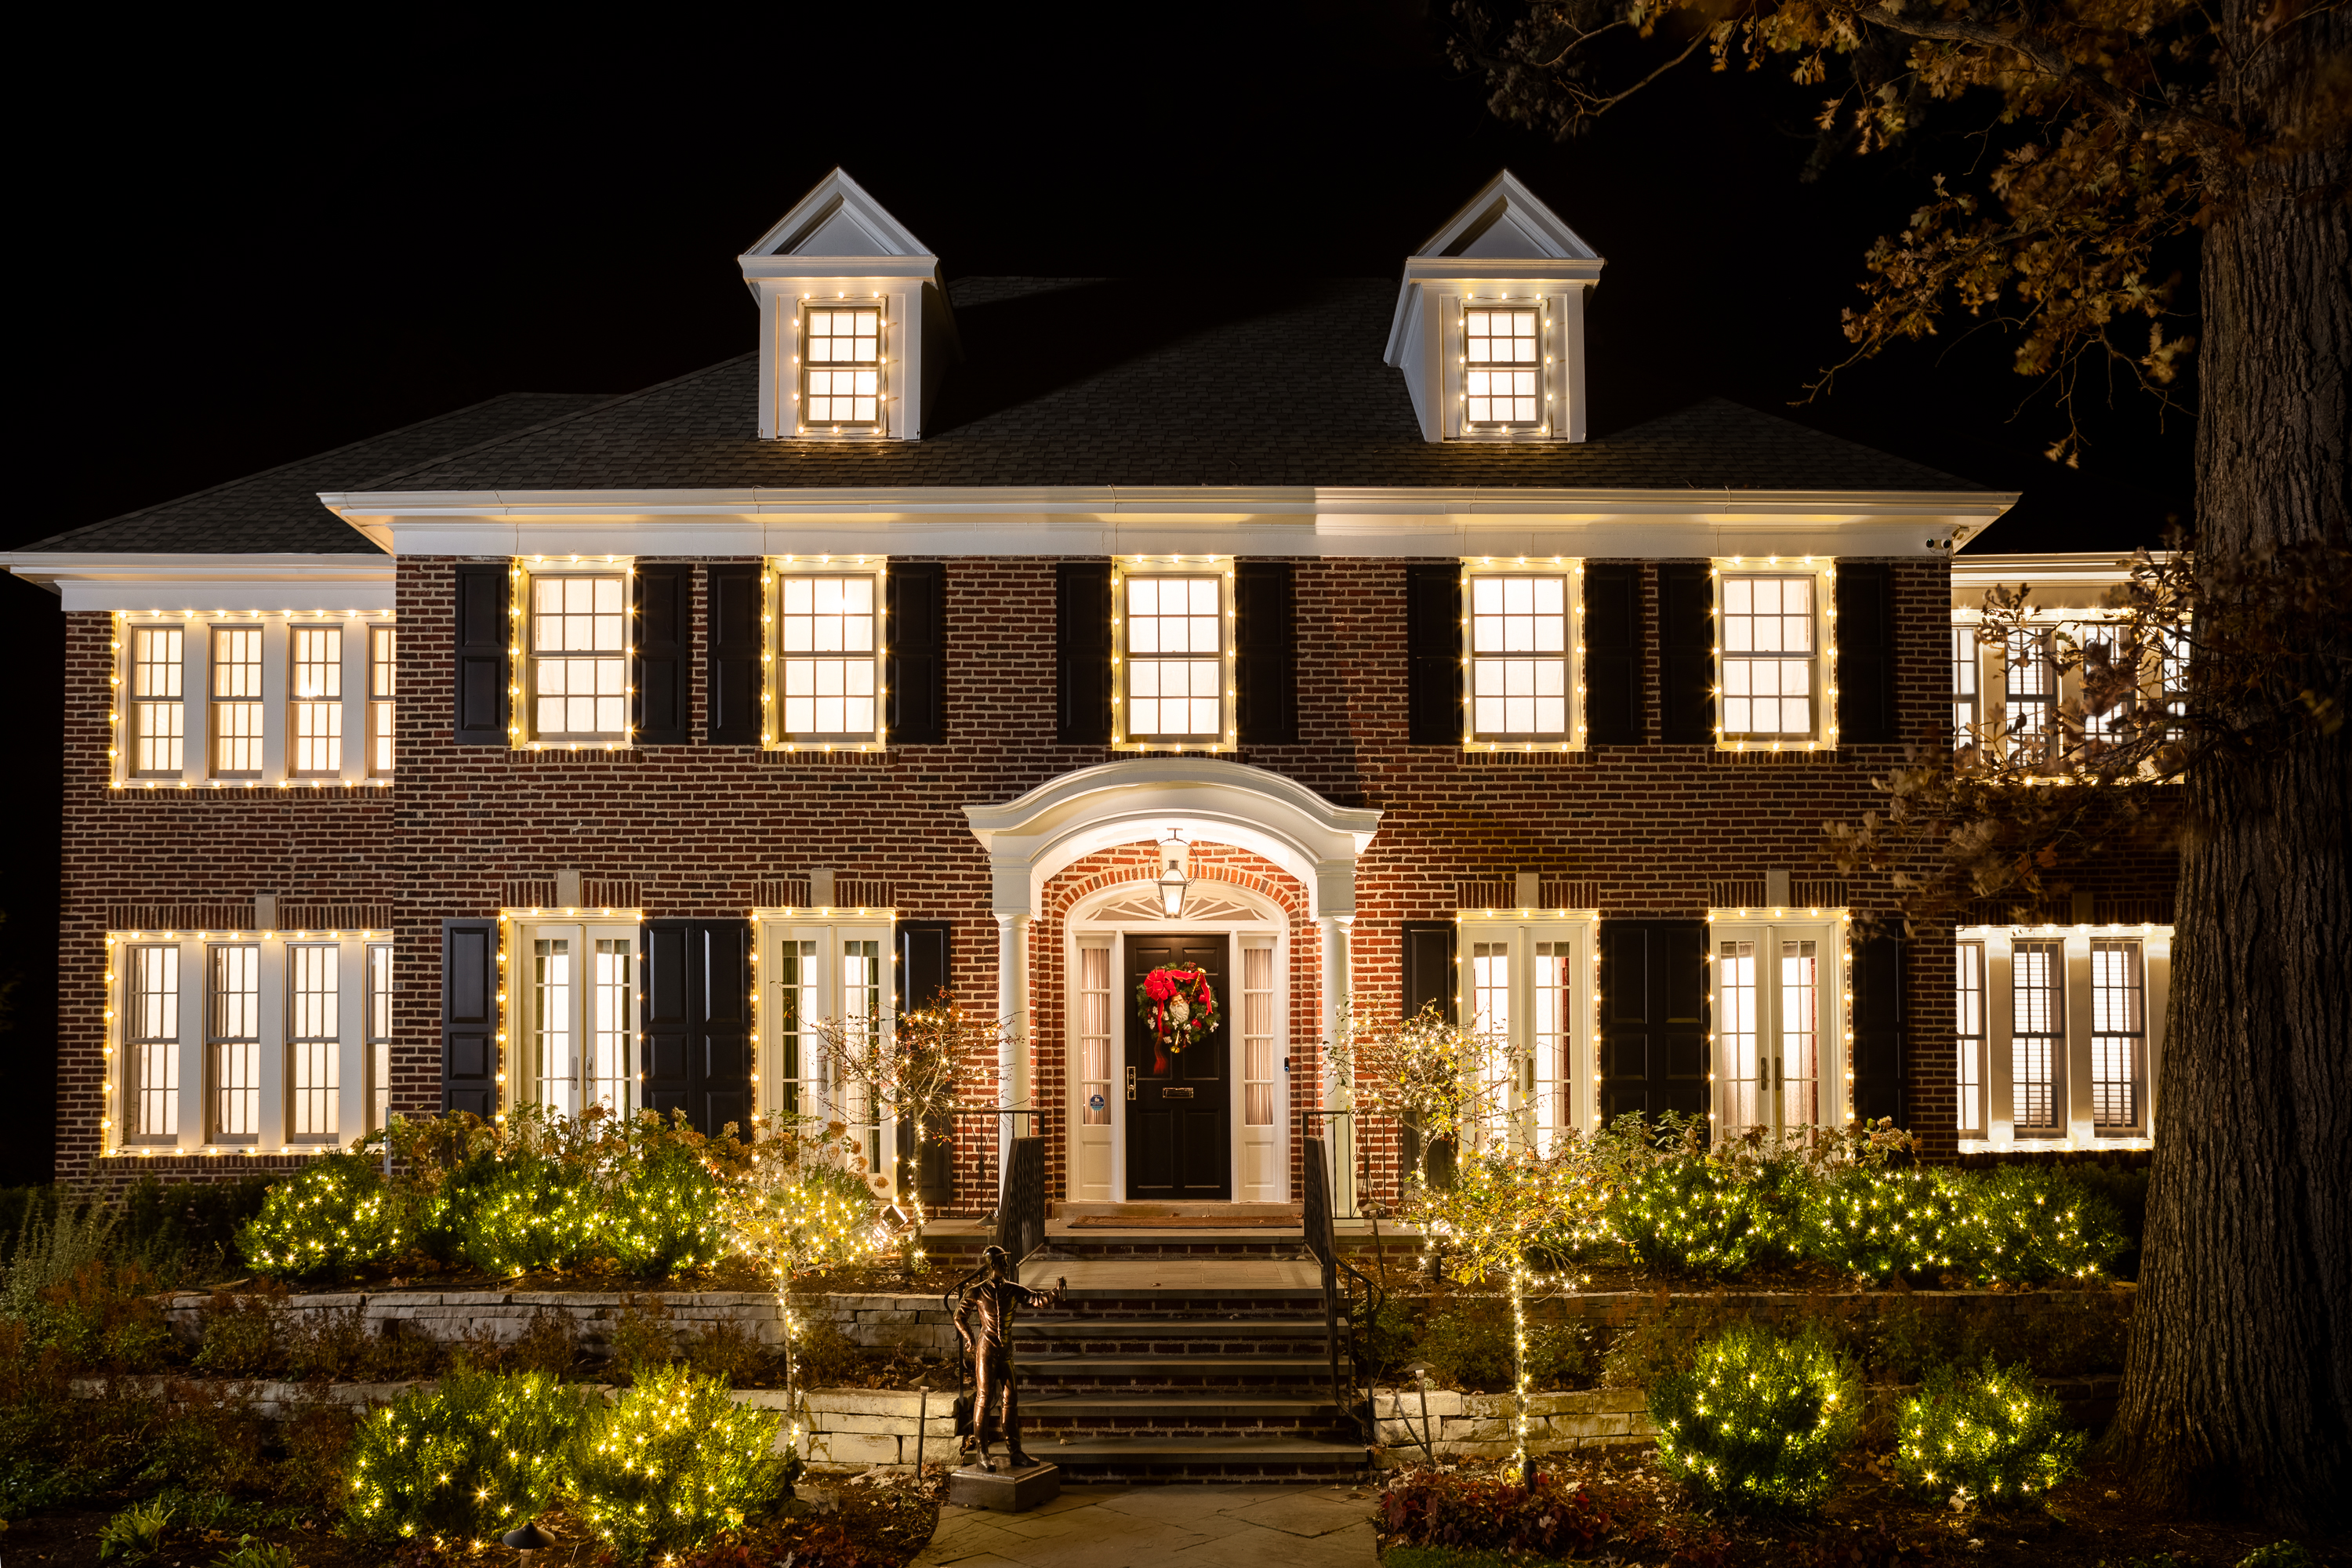 A holiday wish come true: The real-life Home Alone house is now